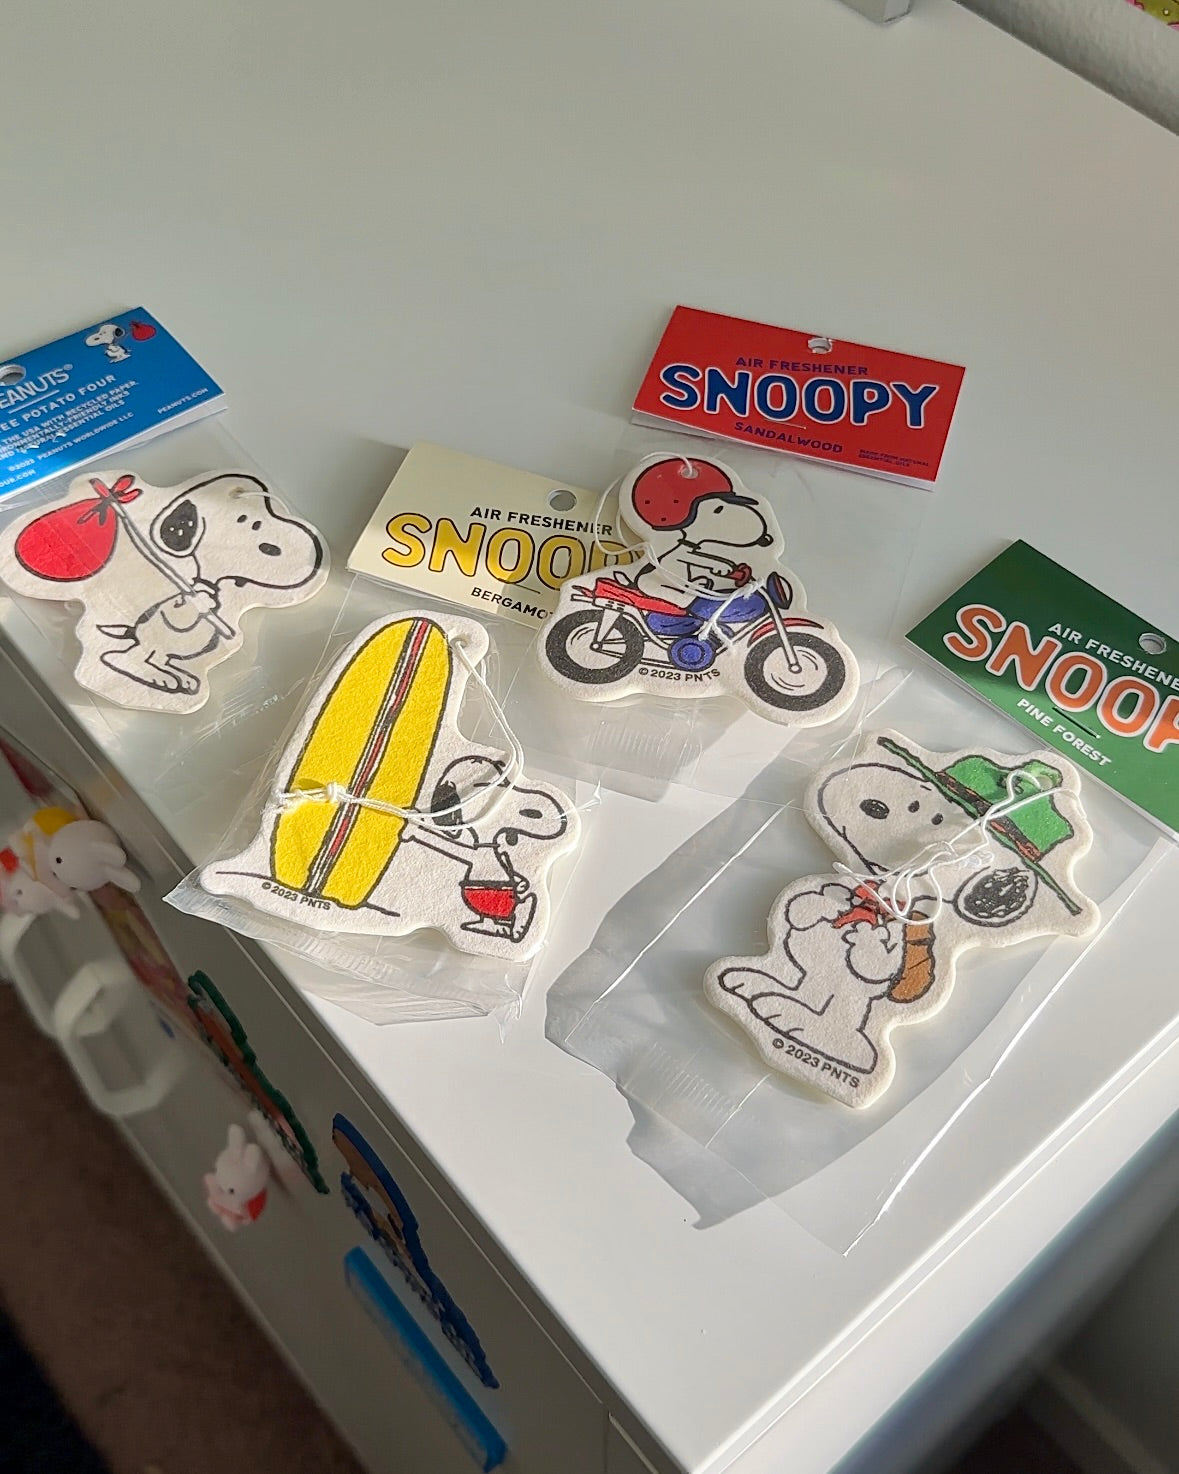 Snoopy Air Freshener 'SURF' - Pine Scent